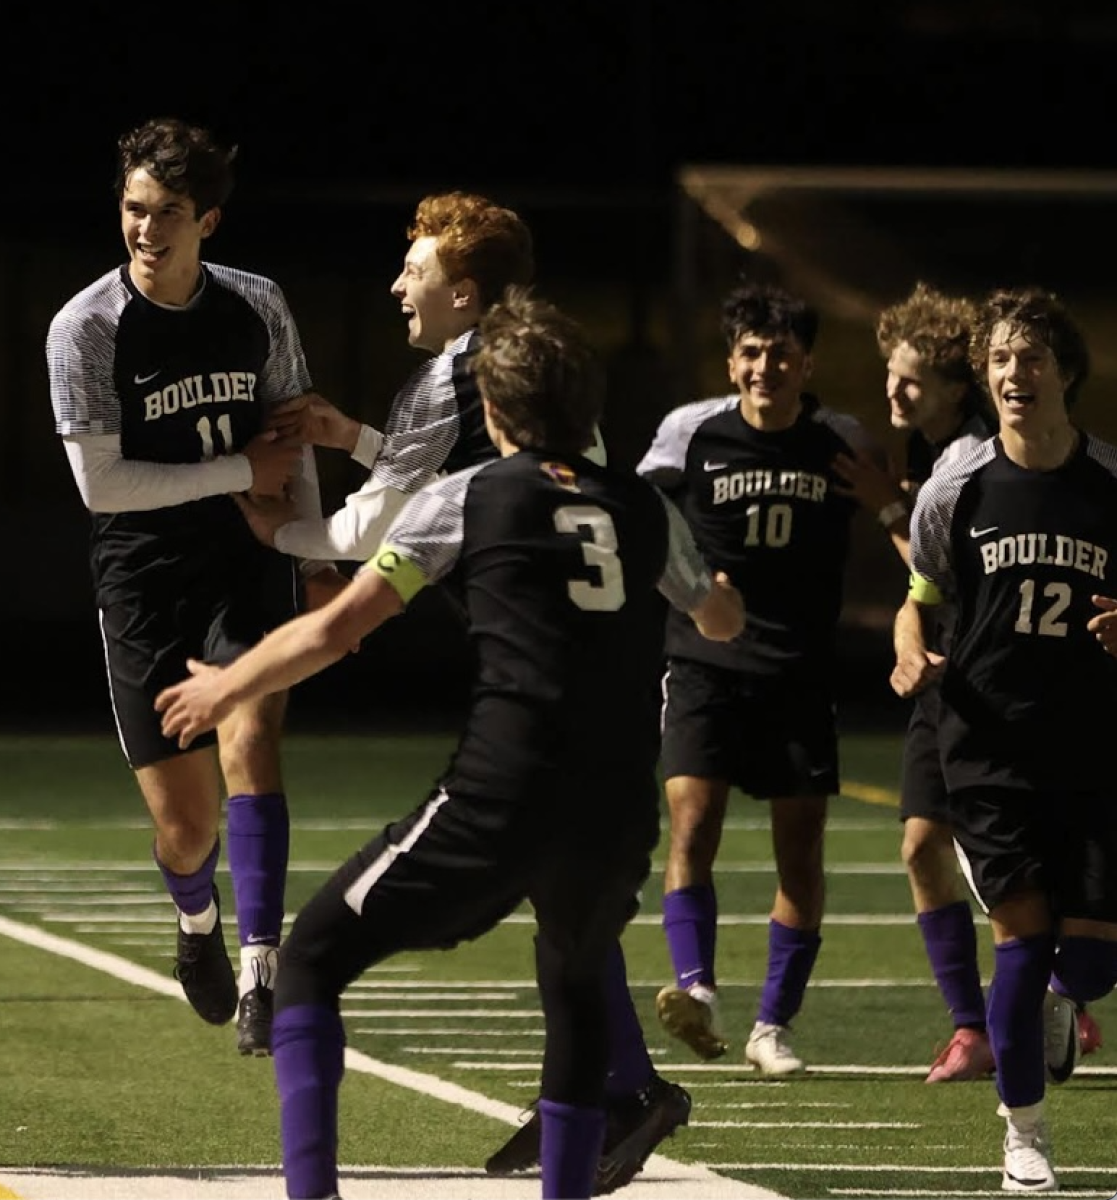 Boys+Soccer+celebrating+one+of+their+4+goals+joyfully+in+their+October+25th+playoff+game+vs+Grandview.